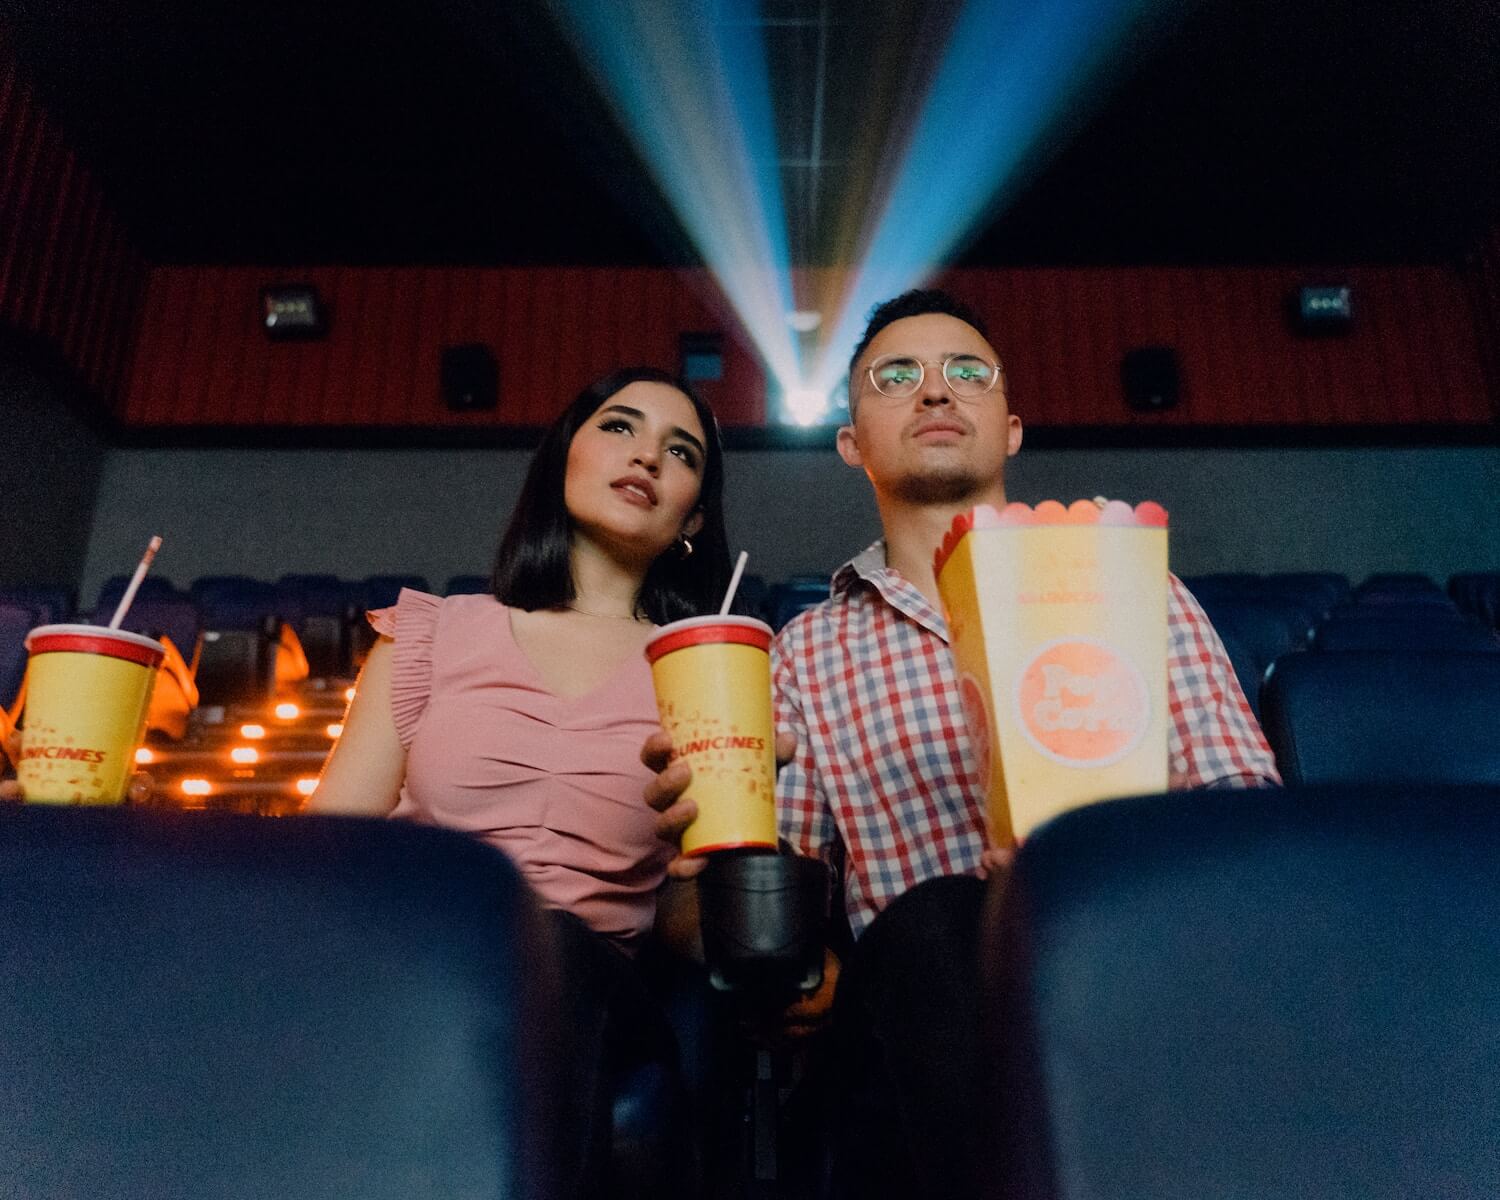 2 people sitting in a movie theater